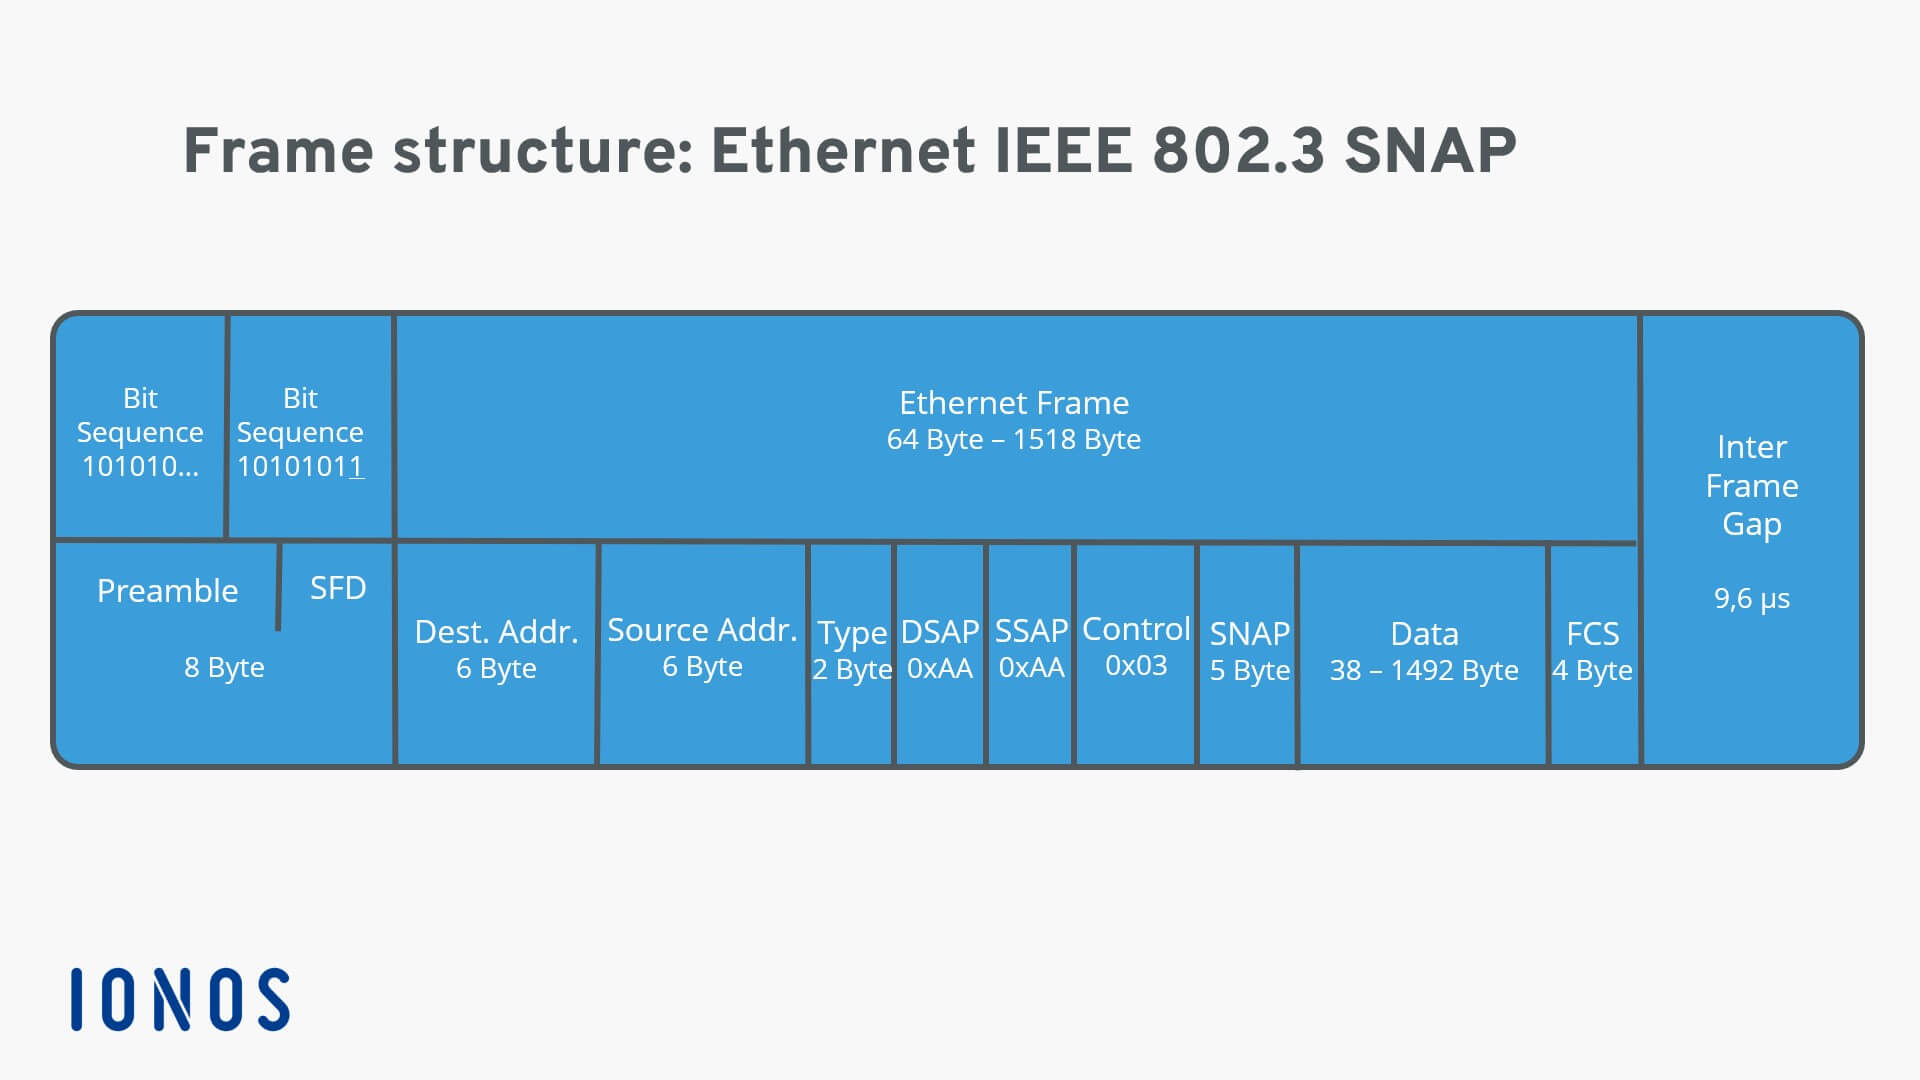 Representation of an Ethernet 802.3 SNAP frame structure